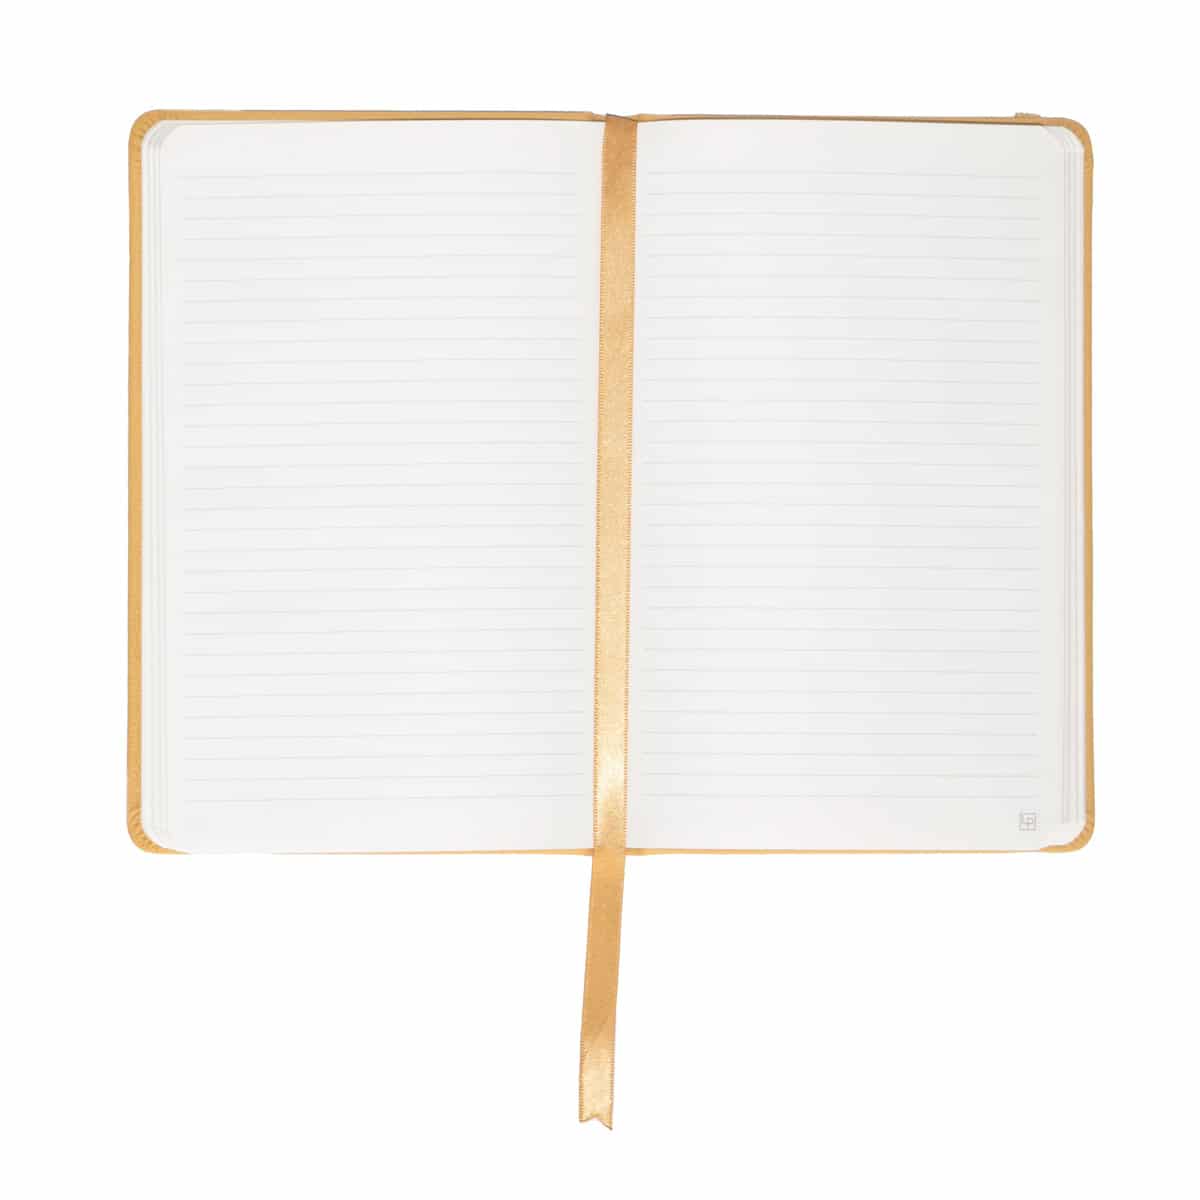 Butter Yellow large lined notebook open with yellow satin ribbon marker